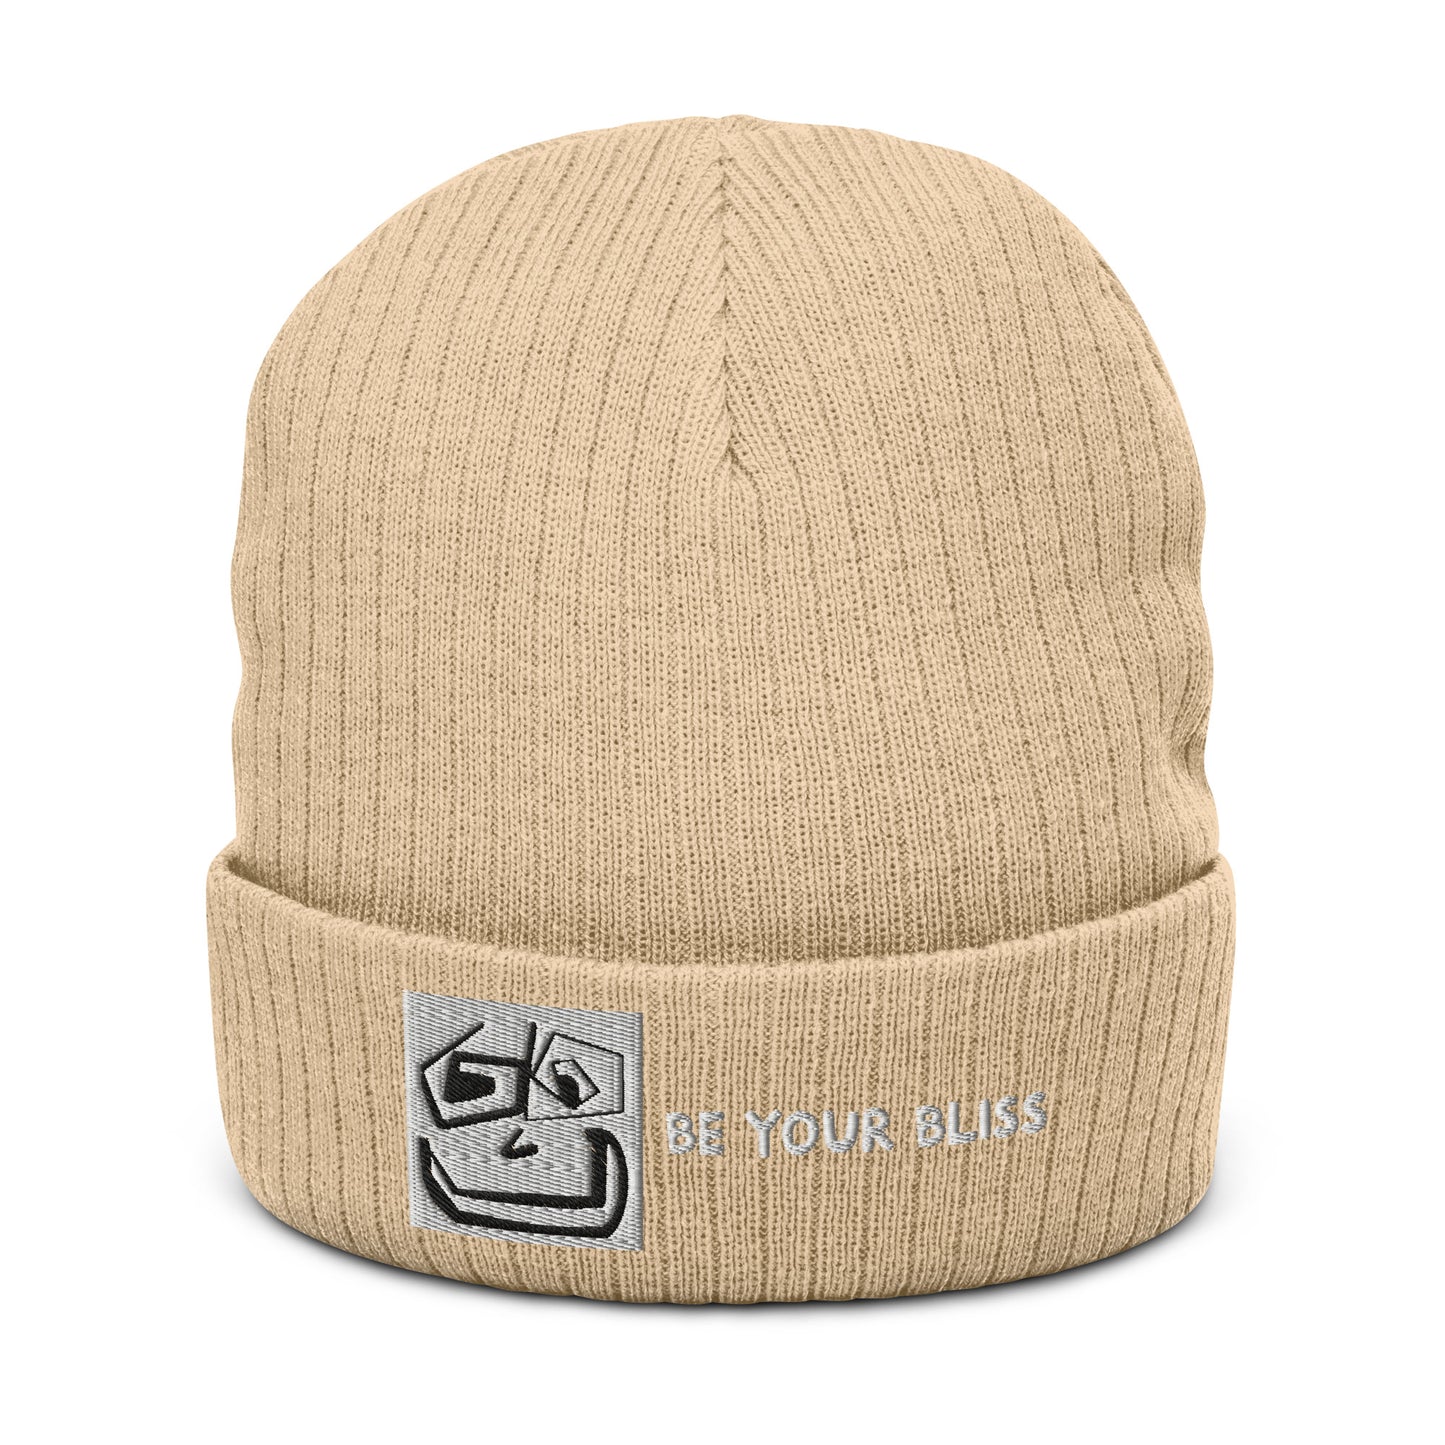 Ribbed "Be Your Bliss" Beanie